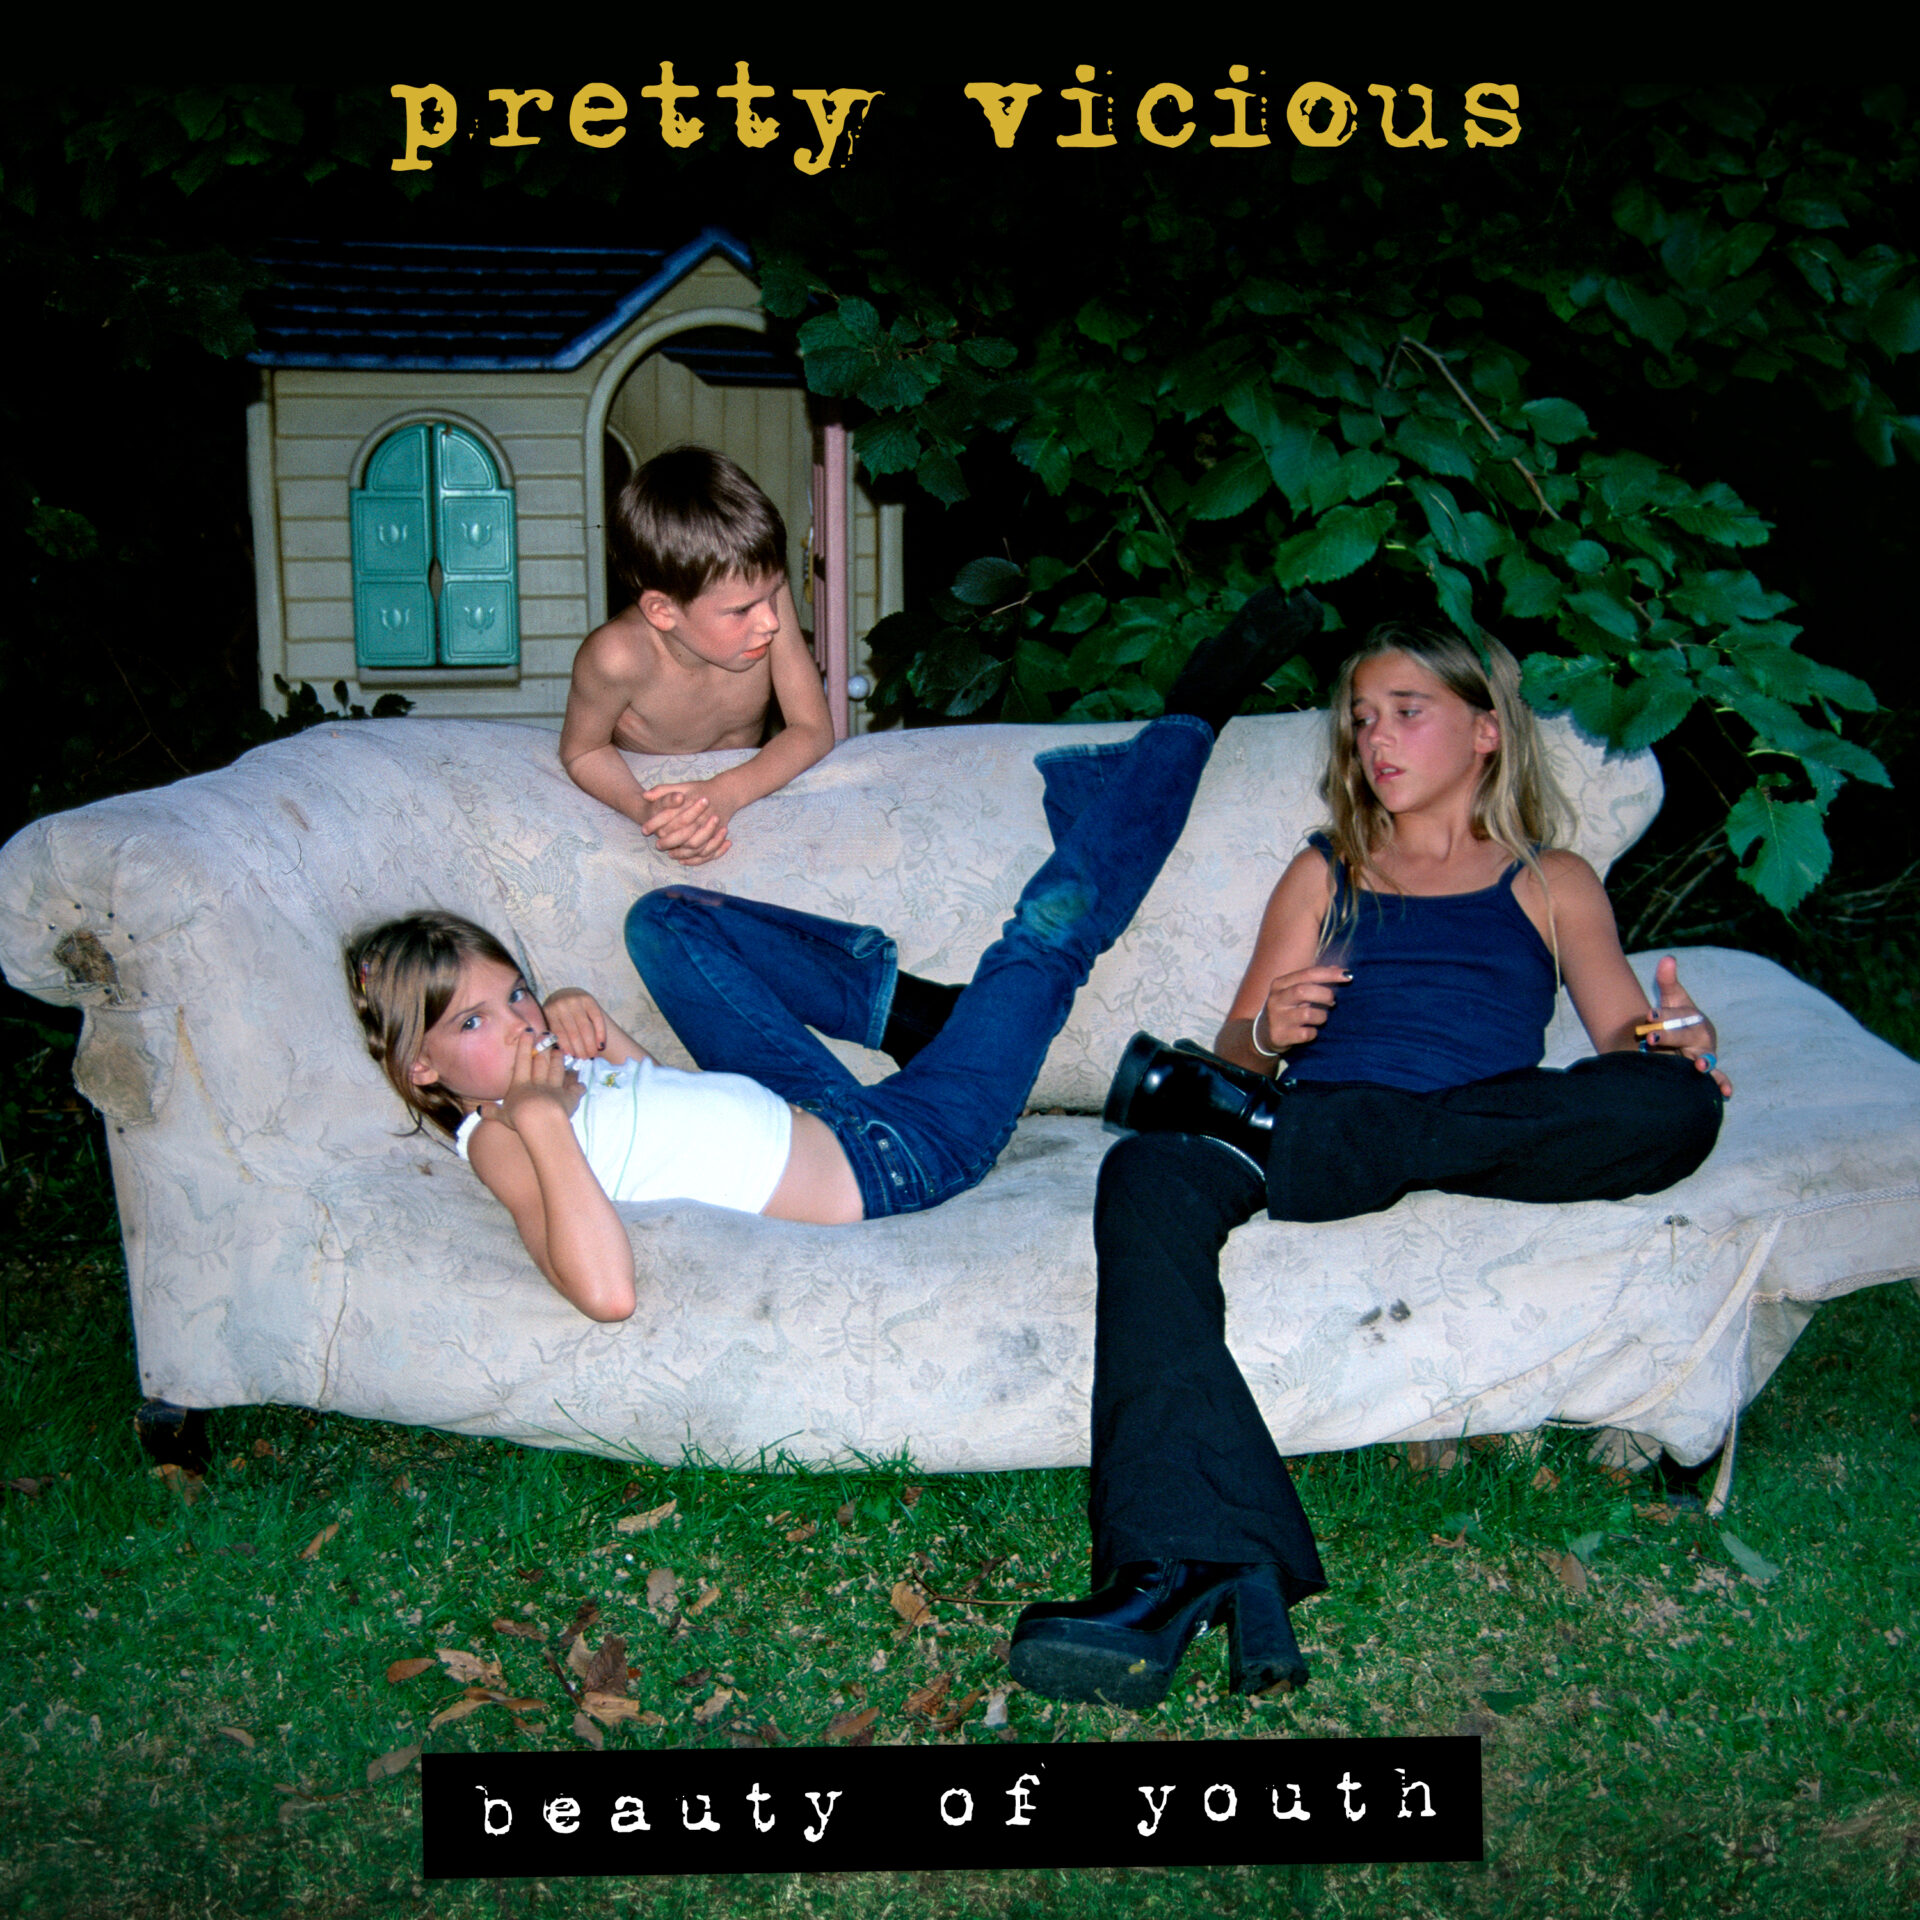 Pretty Vicious detail their debut release, ‘Beauty Of Youth’